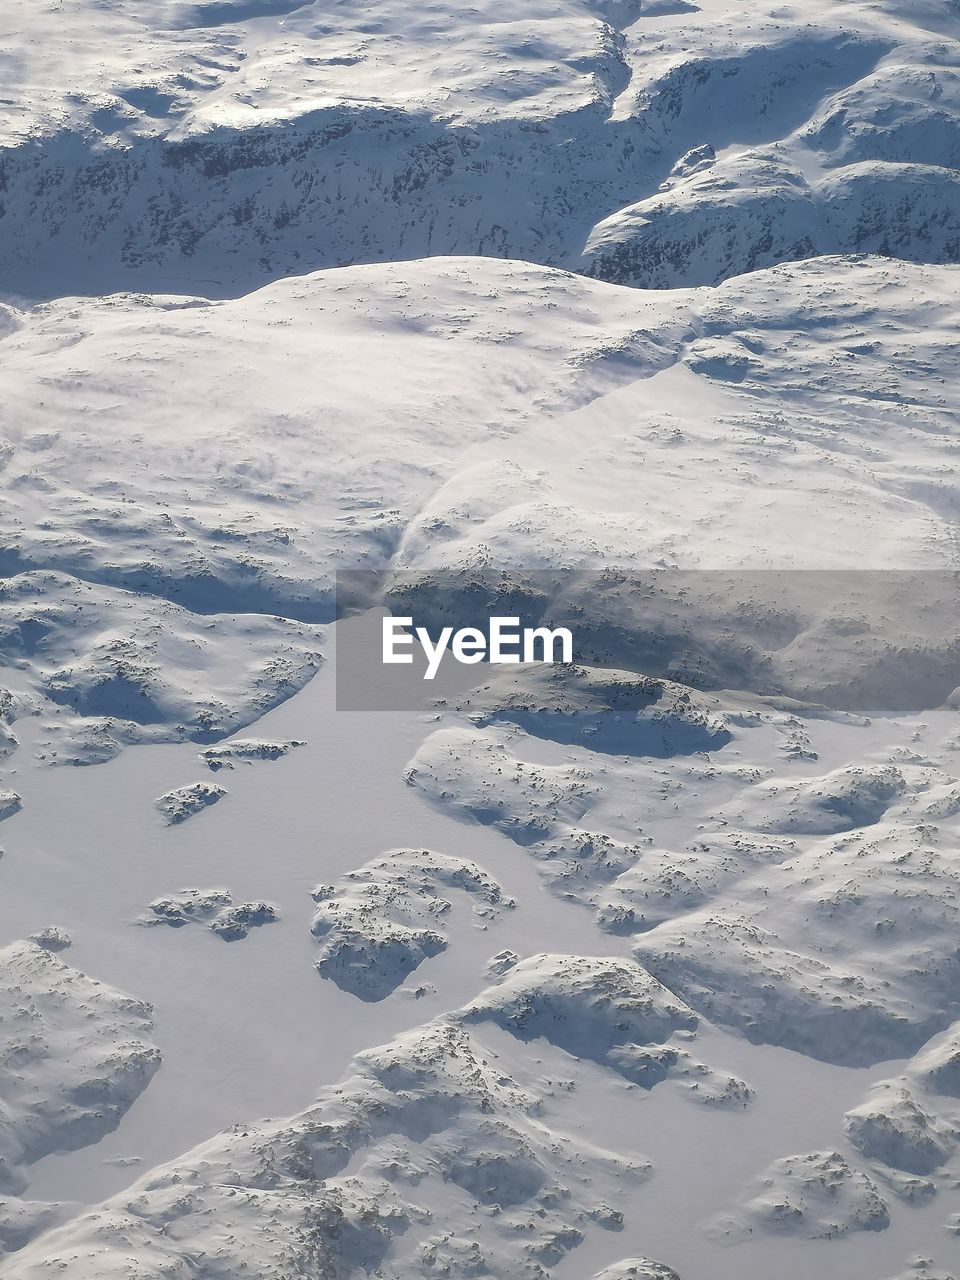 HIGH ANGLE VIEW OF SNOW COVERED LANDSCAPE AGAINST MOUNTAIN